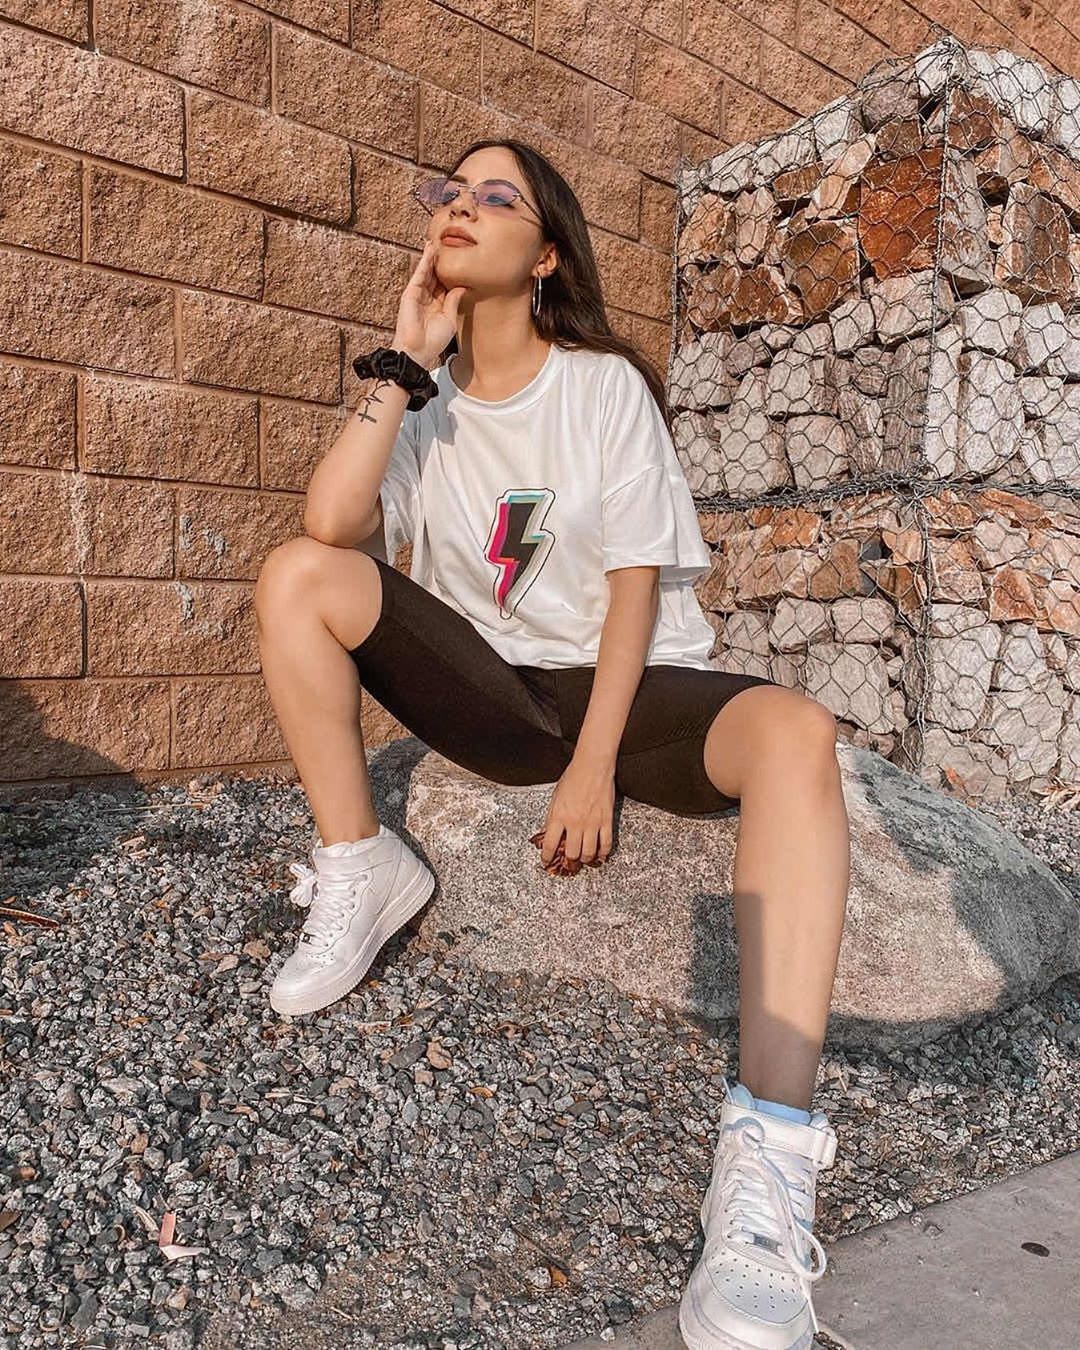 SHEIN.COM - There's no competition, cause no one can be you! ✨  @fanytapias

Shop Item #: 1087616、743876

#SHEIN #SHEINgals #SHEINstyle #SHEINsummer #tee